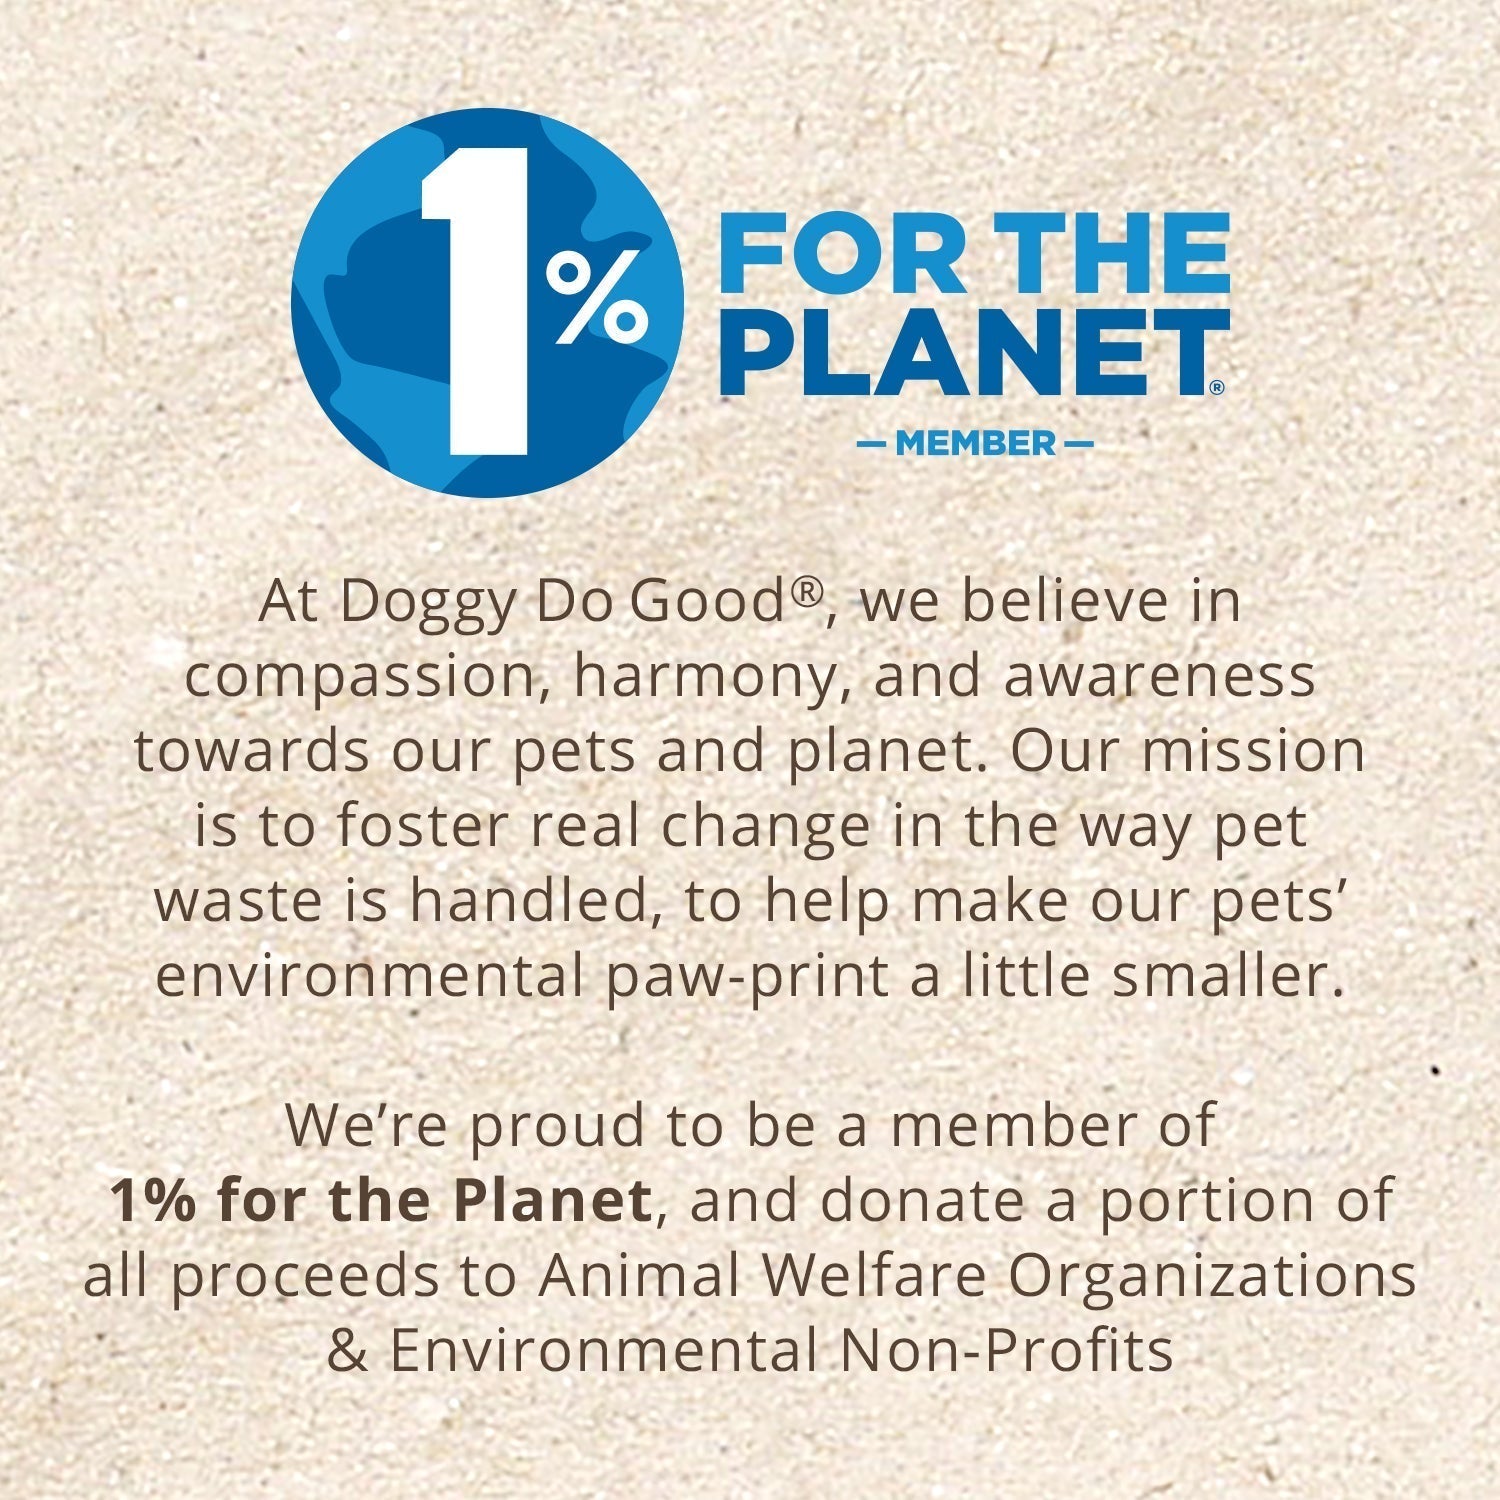  Doggy Do Good Poop Bags